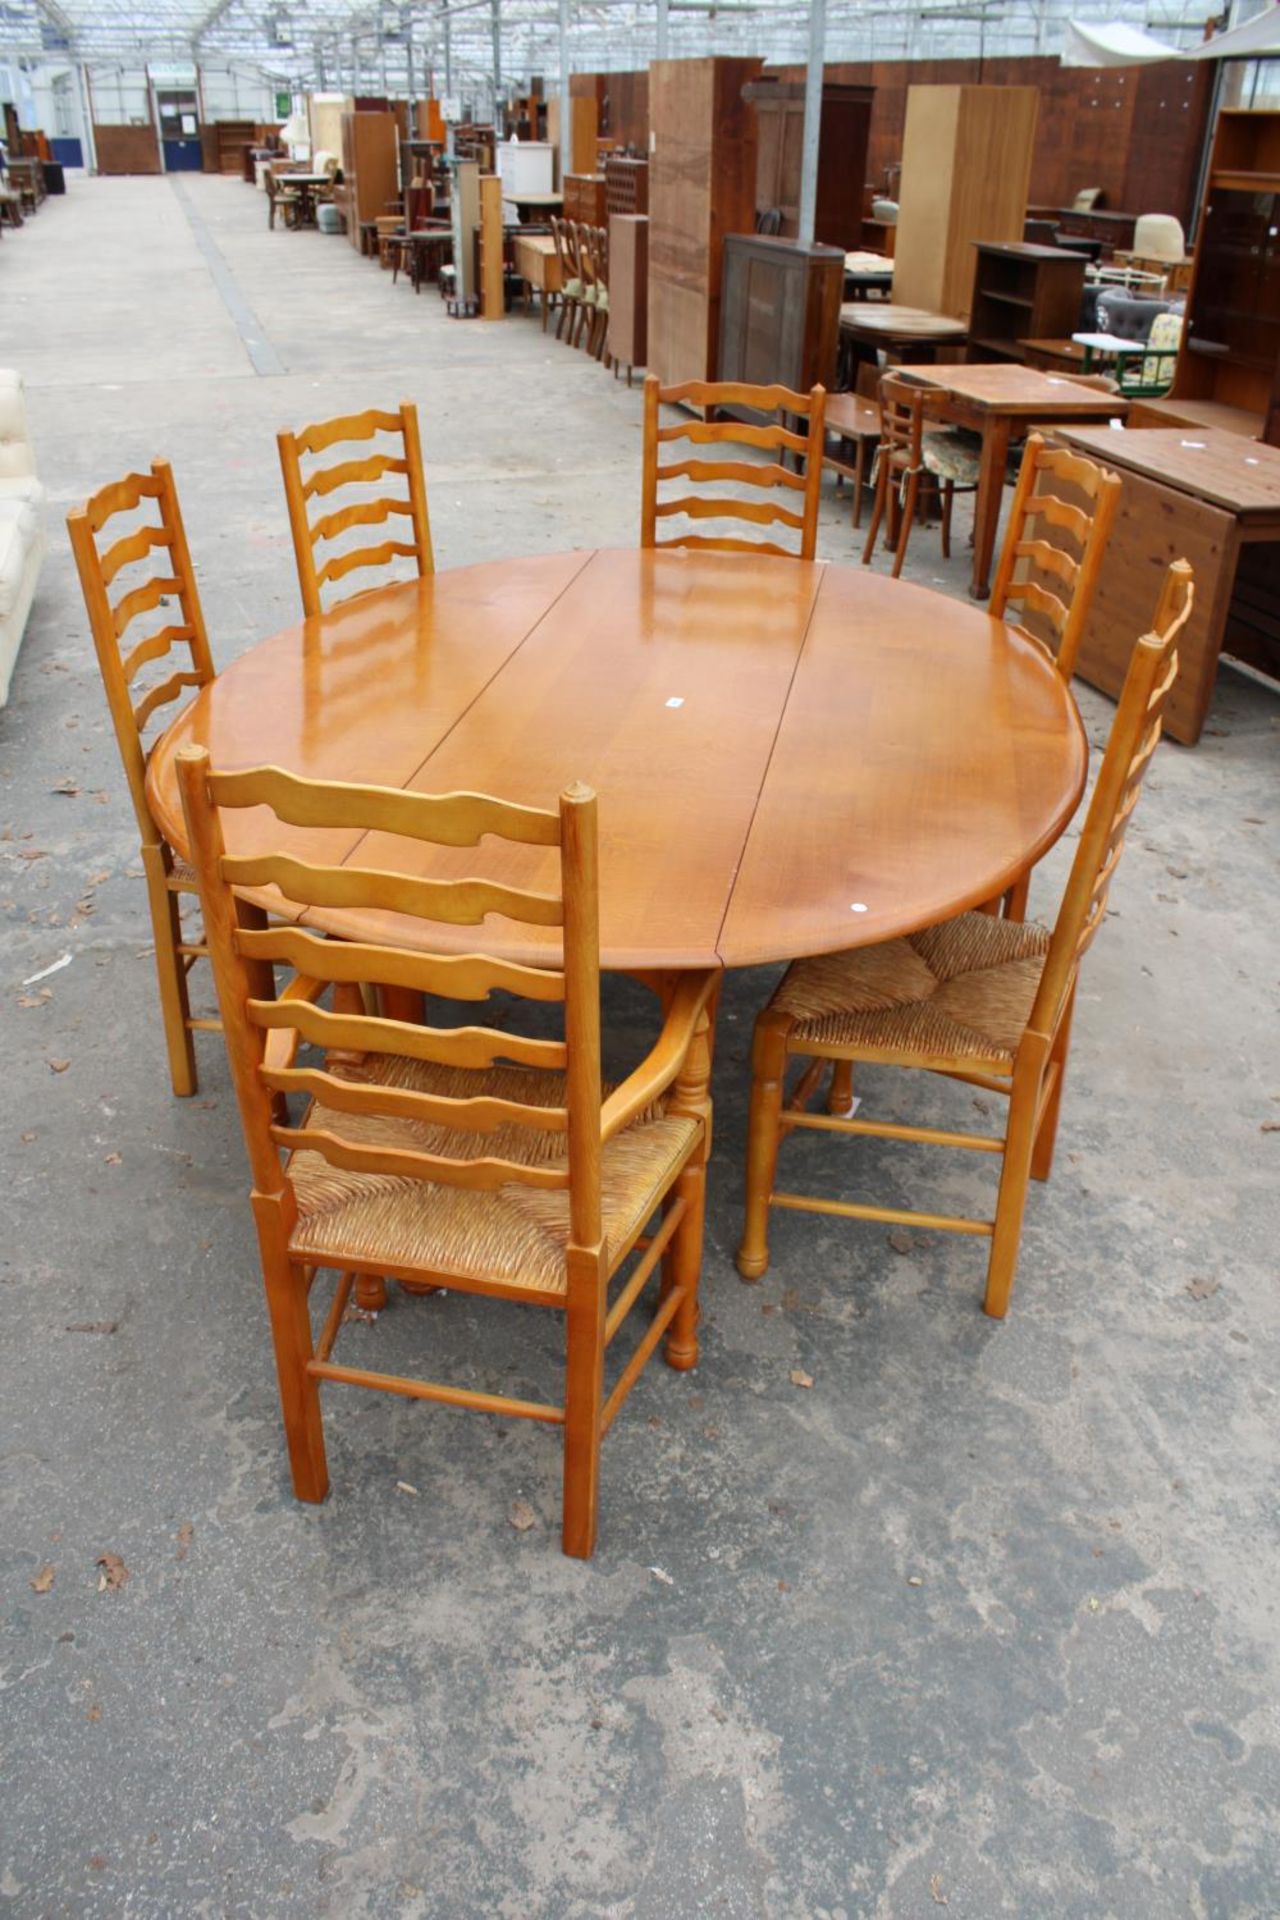 A GEORGIAN STYLE OVAL OAK WAKES TABLE, 77" X 59" OPENED AND SIX LADDER BACK DINING CHAIRS WITH